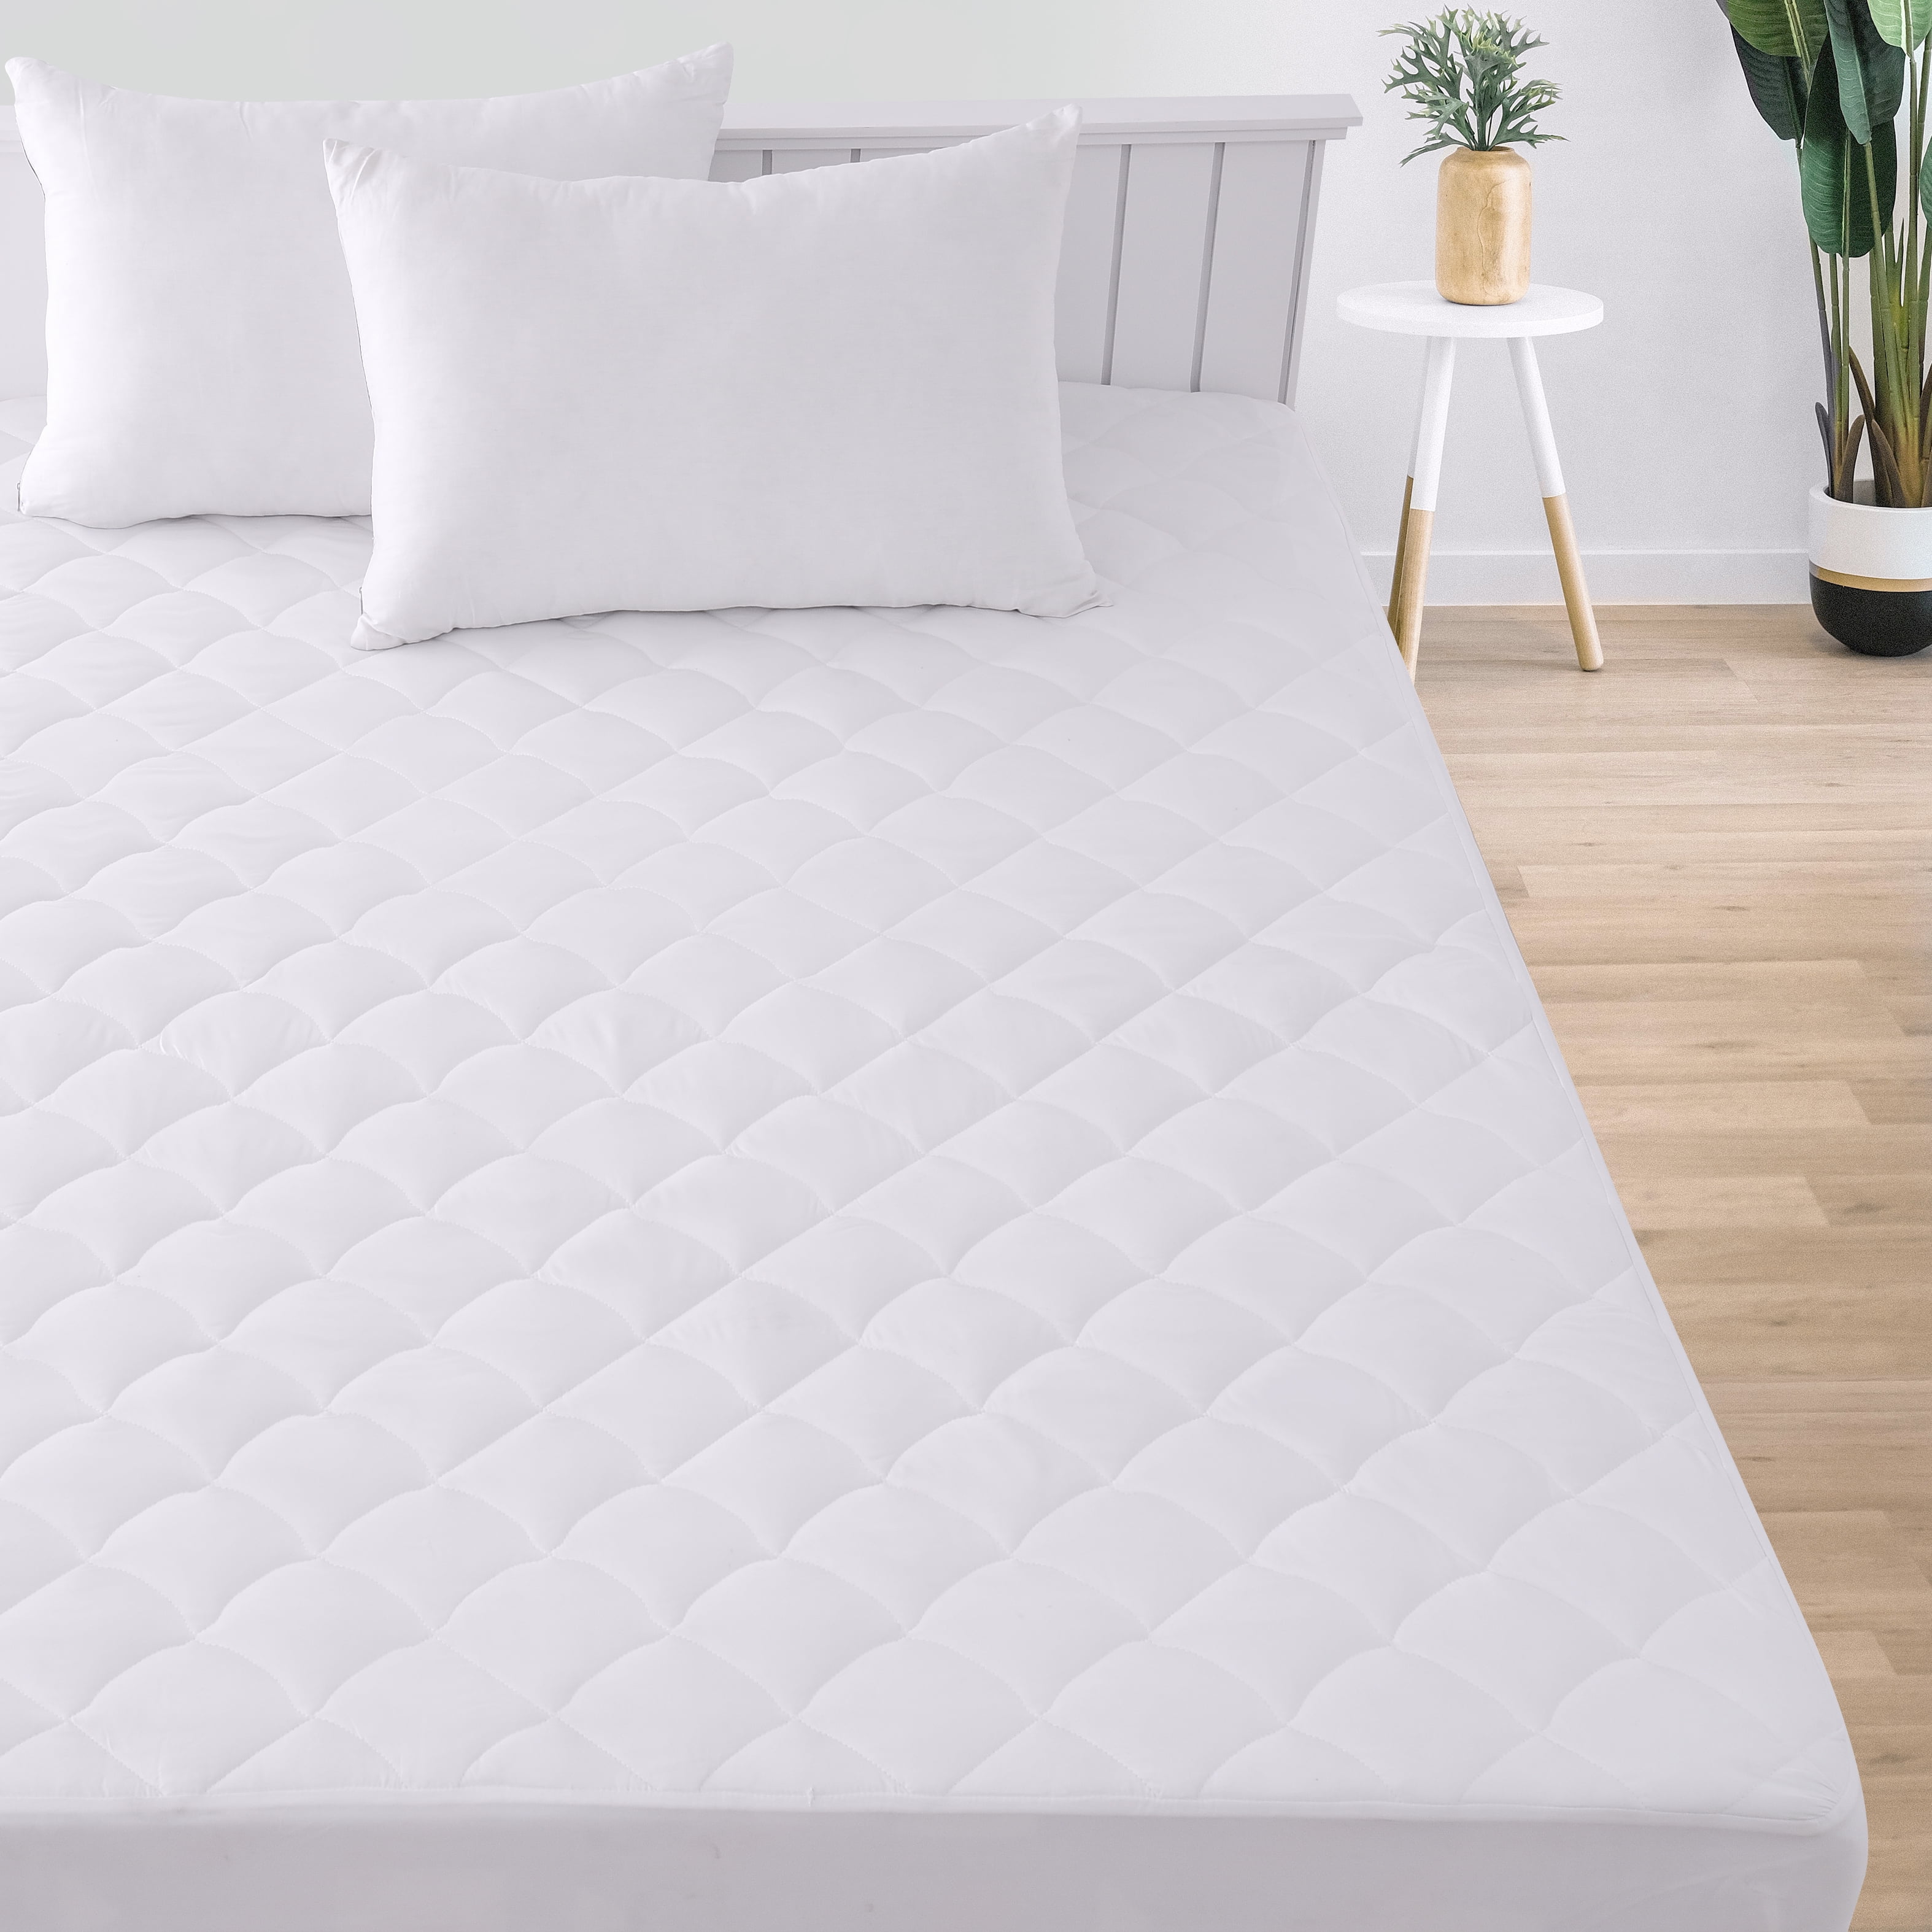  Utopia Bedding Quilted Fitted Mattress Pad (Twin) - Elastic  Fitted Mattress Protector - Mattress Cover Stretches up to 16 Inches Deep -  Machine Washable Mattress Topper : Home & Kitchen